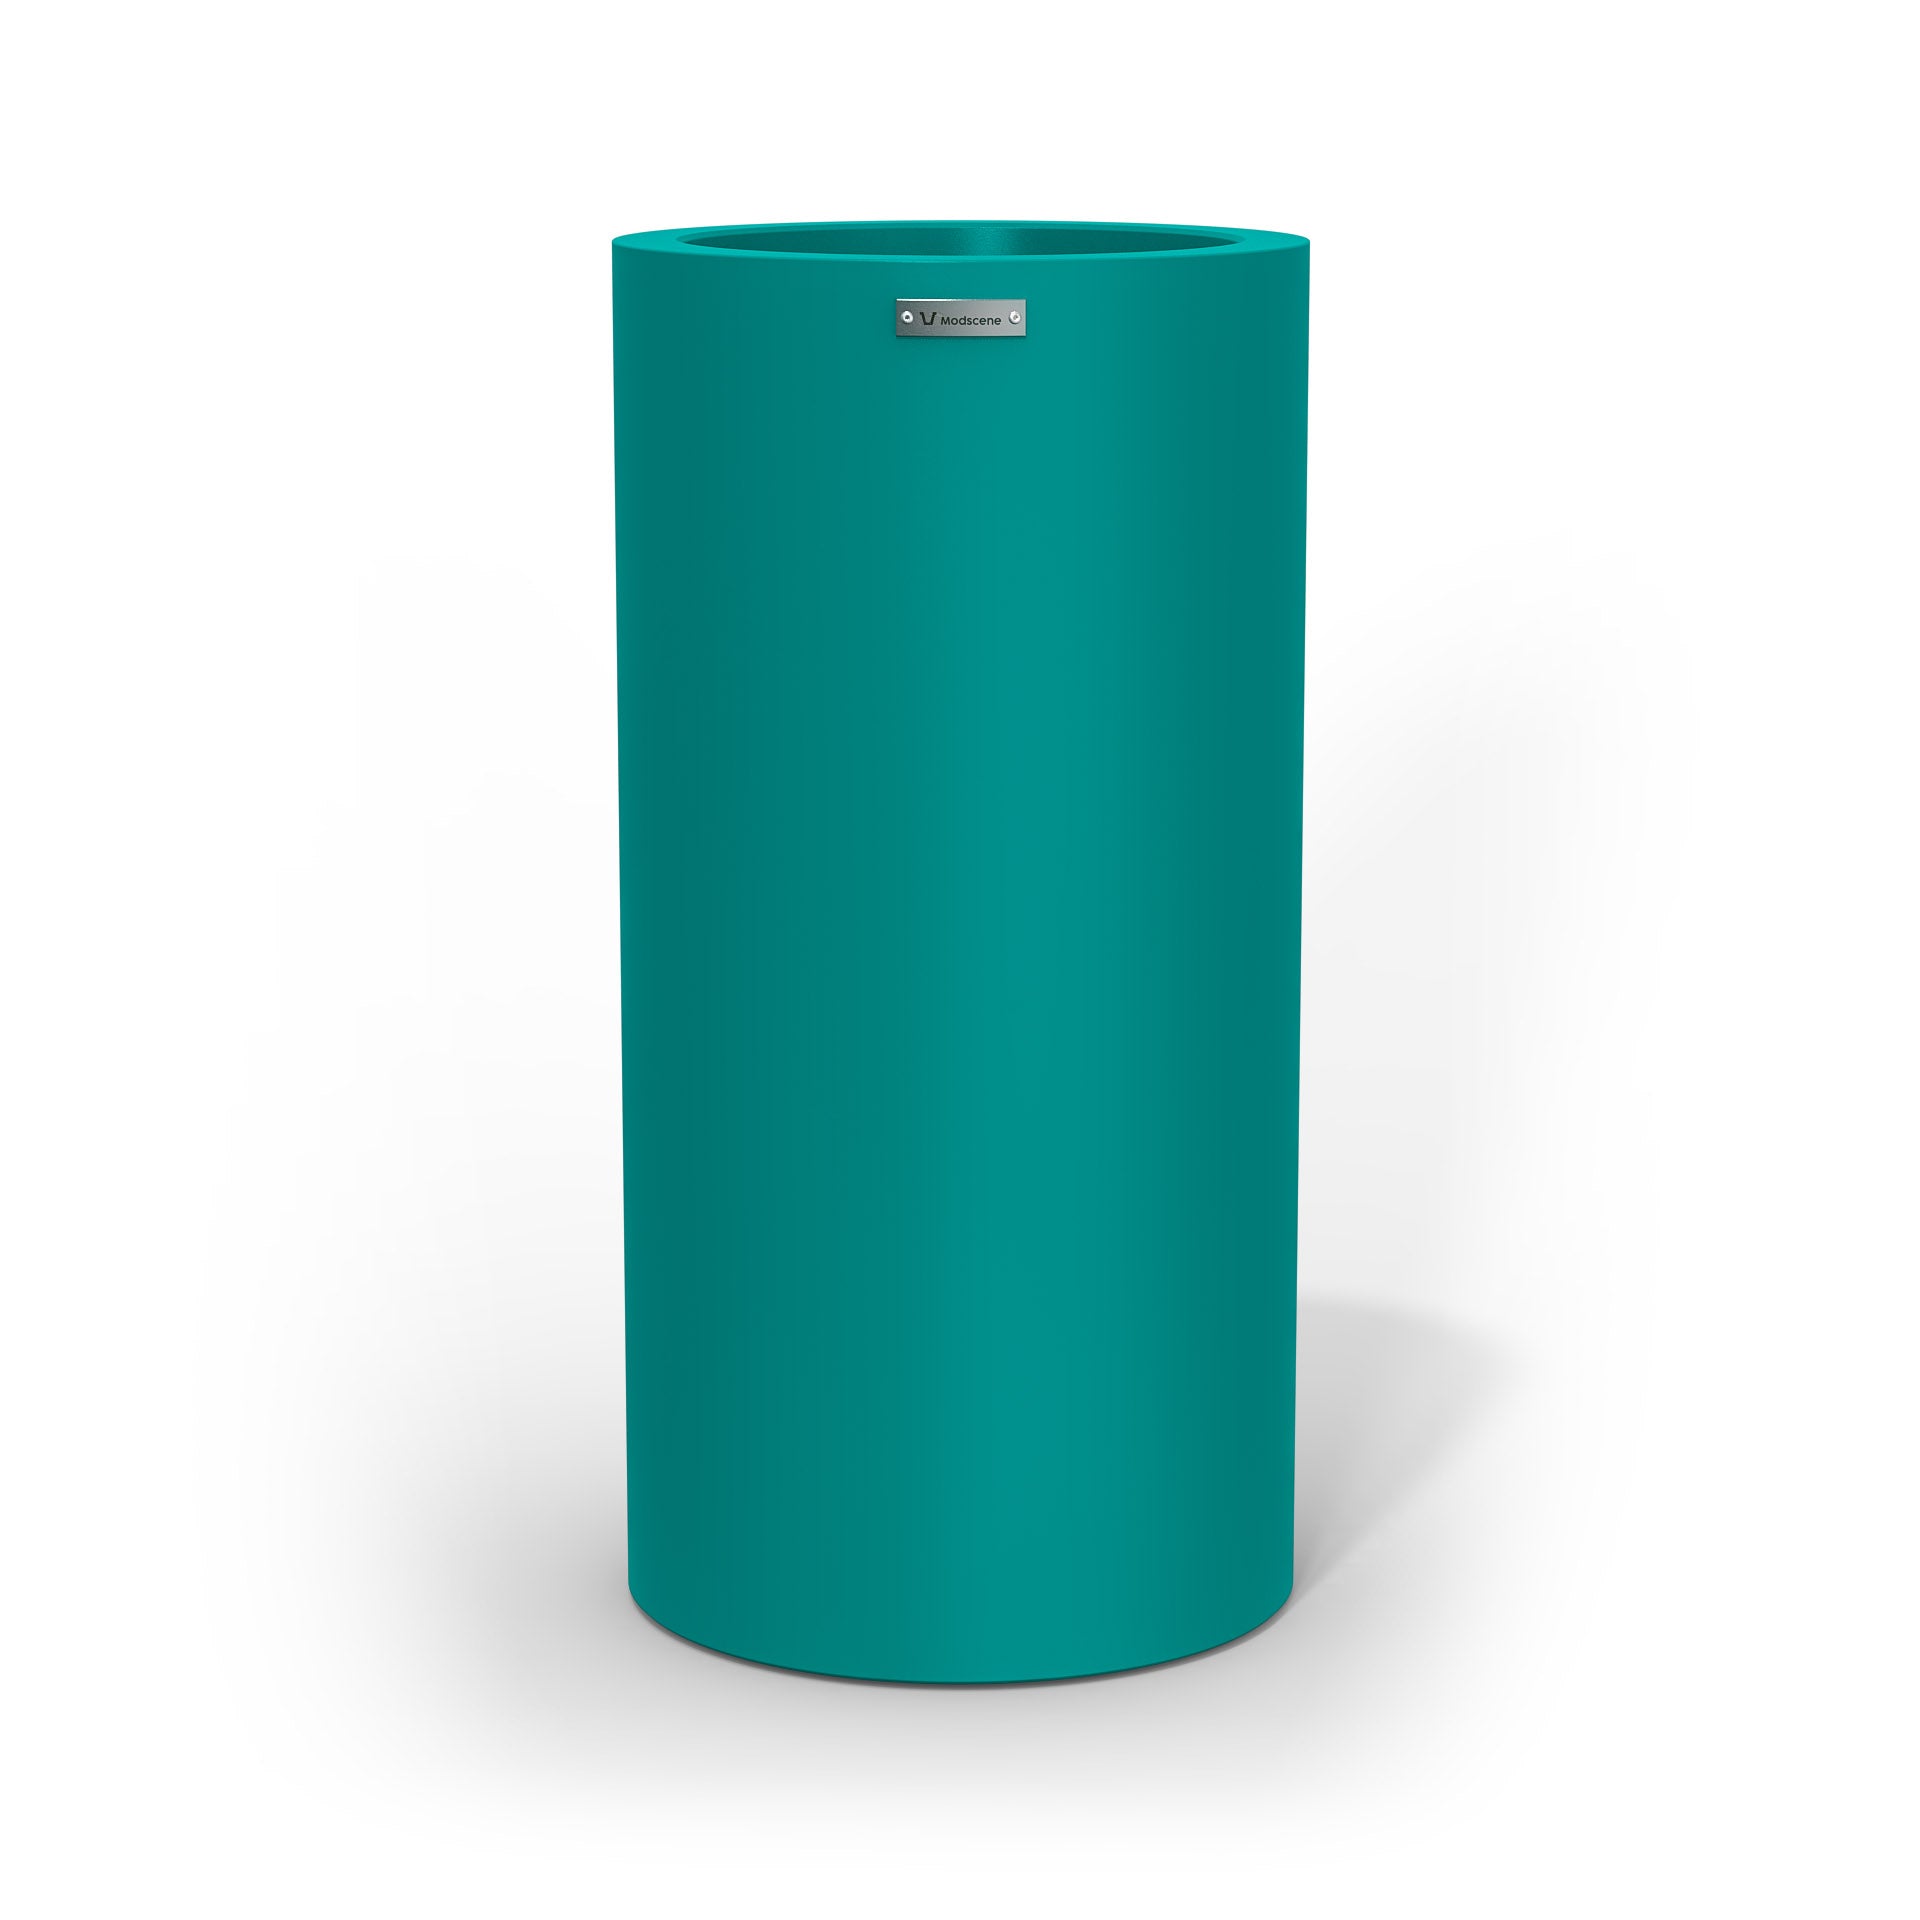 A tall cigar cylinder planter pot in a teal blue colour made by Modscene. Australian planters.